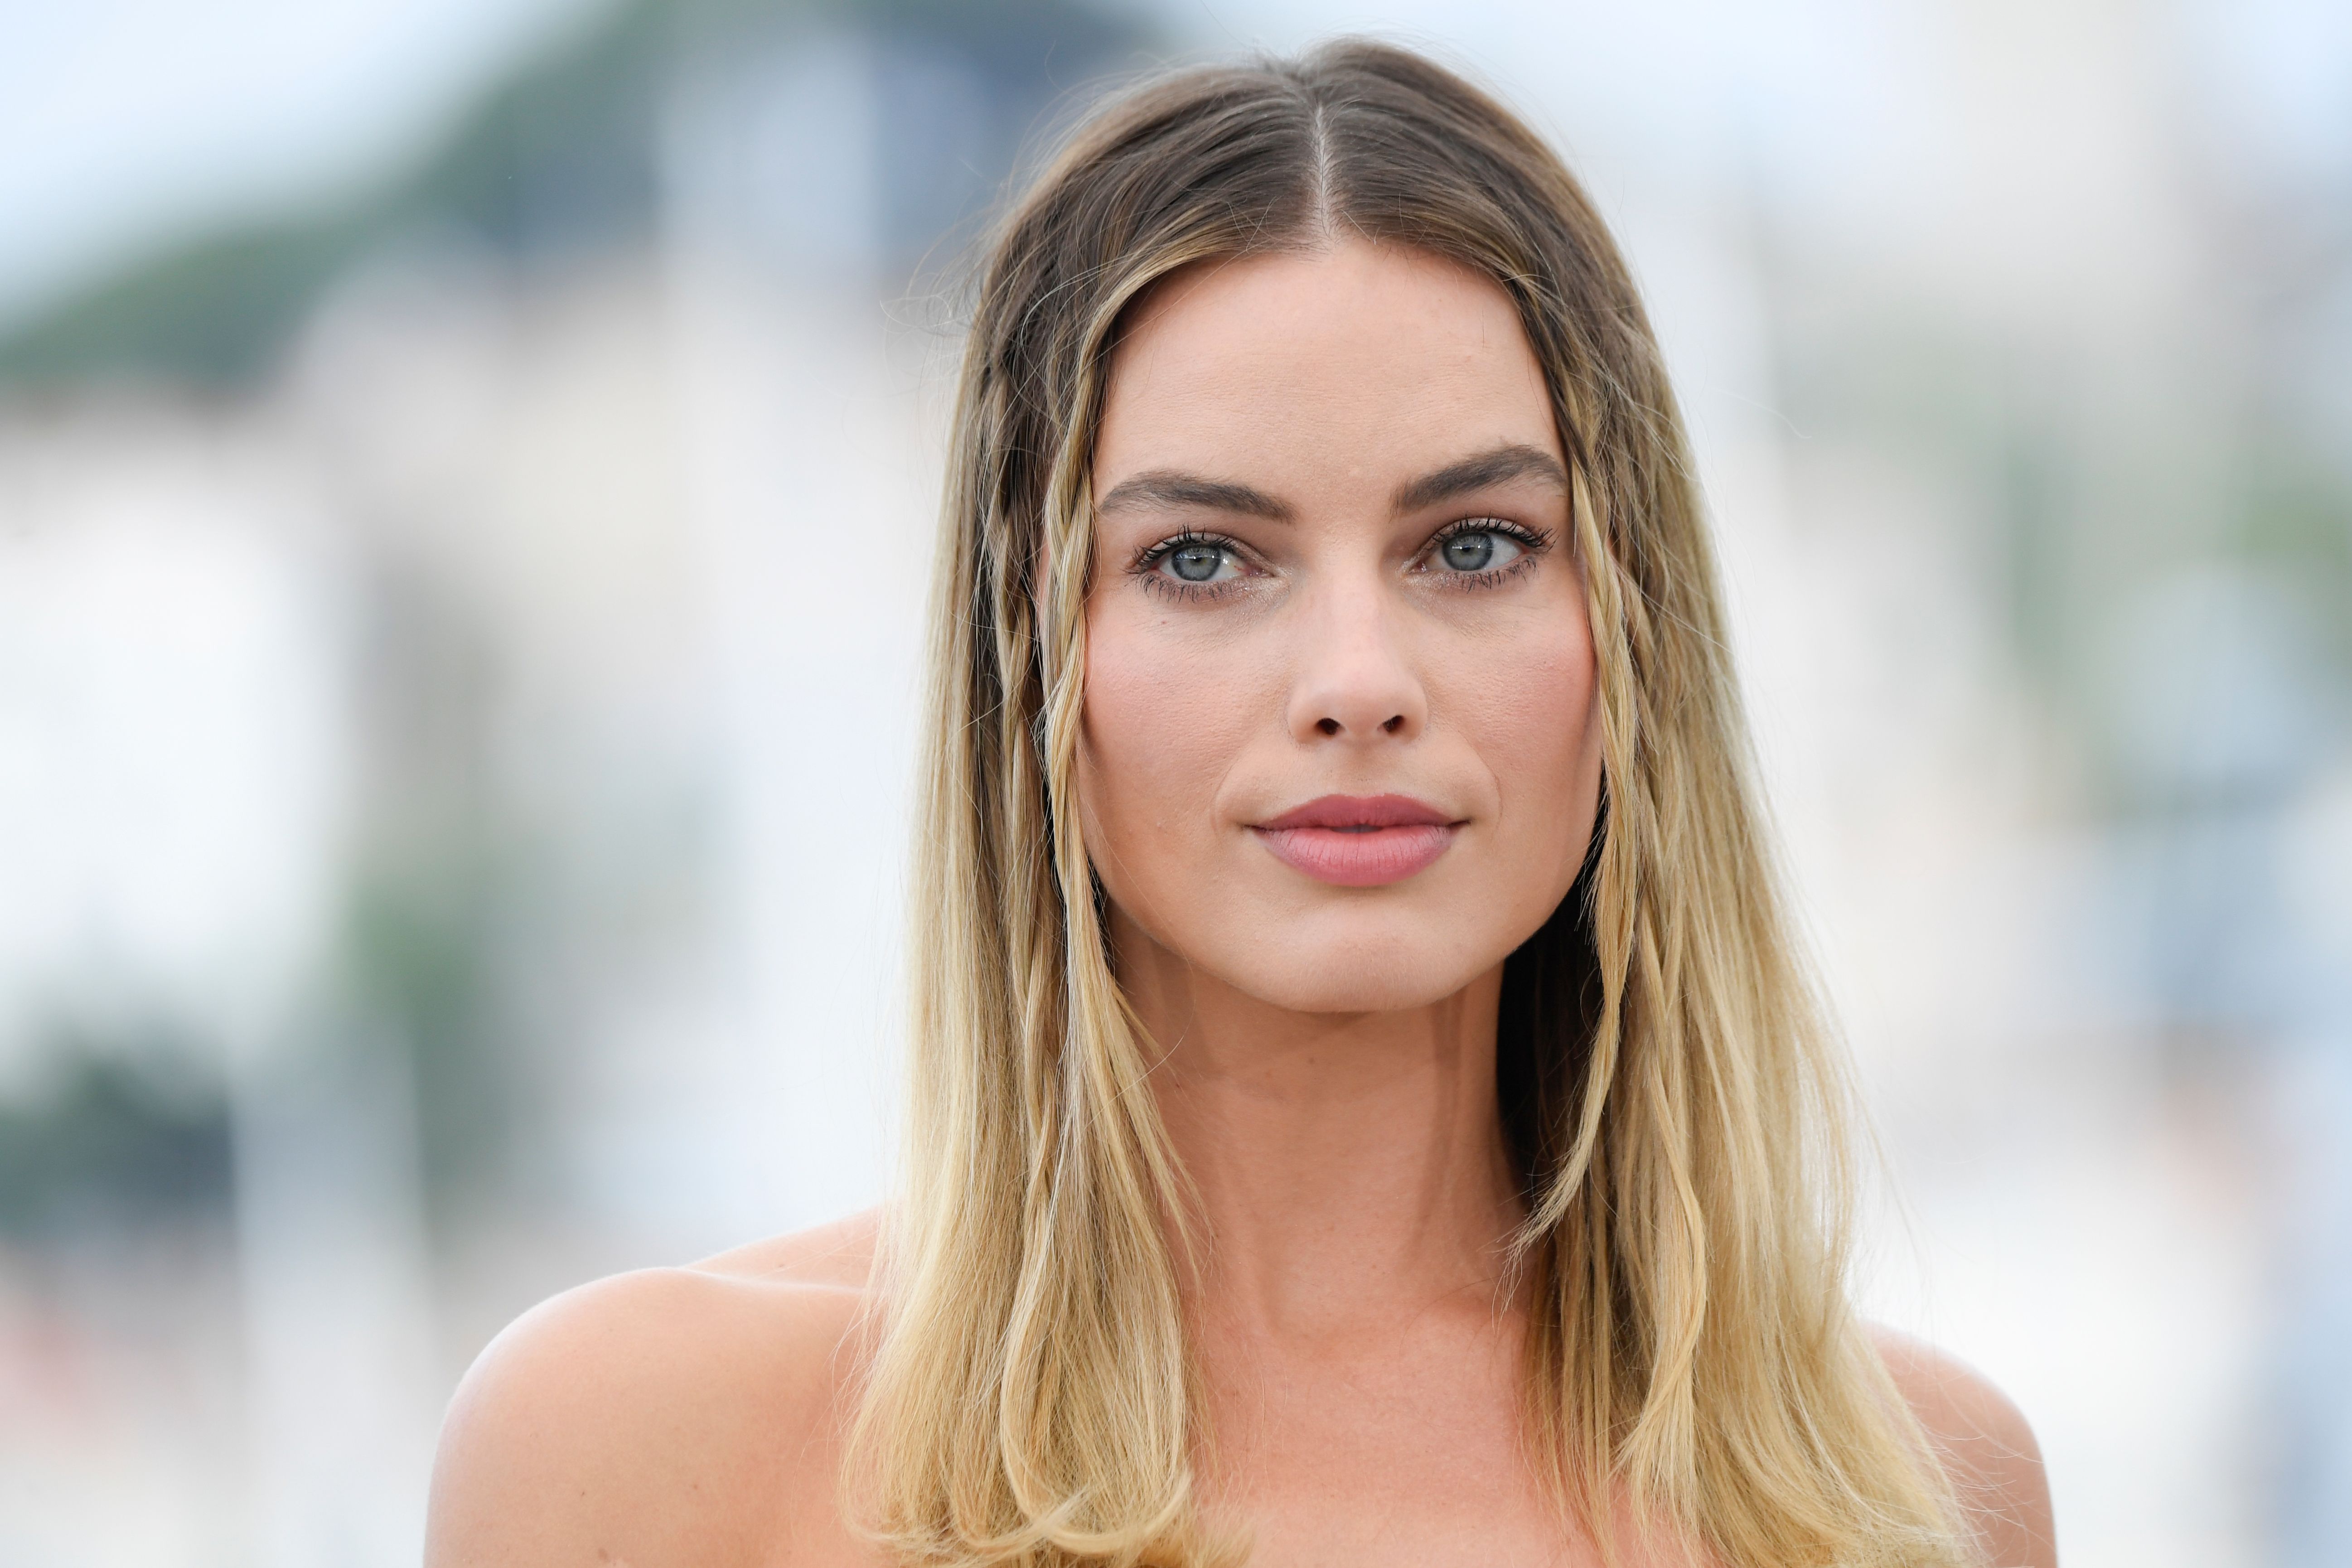 MARGOT ROBBIE during the photocall for the film